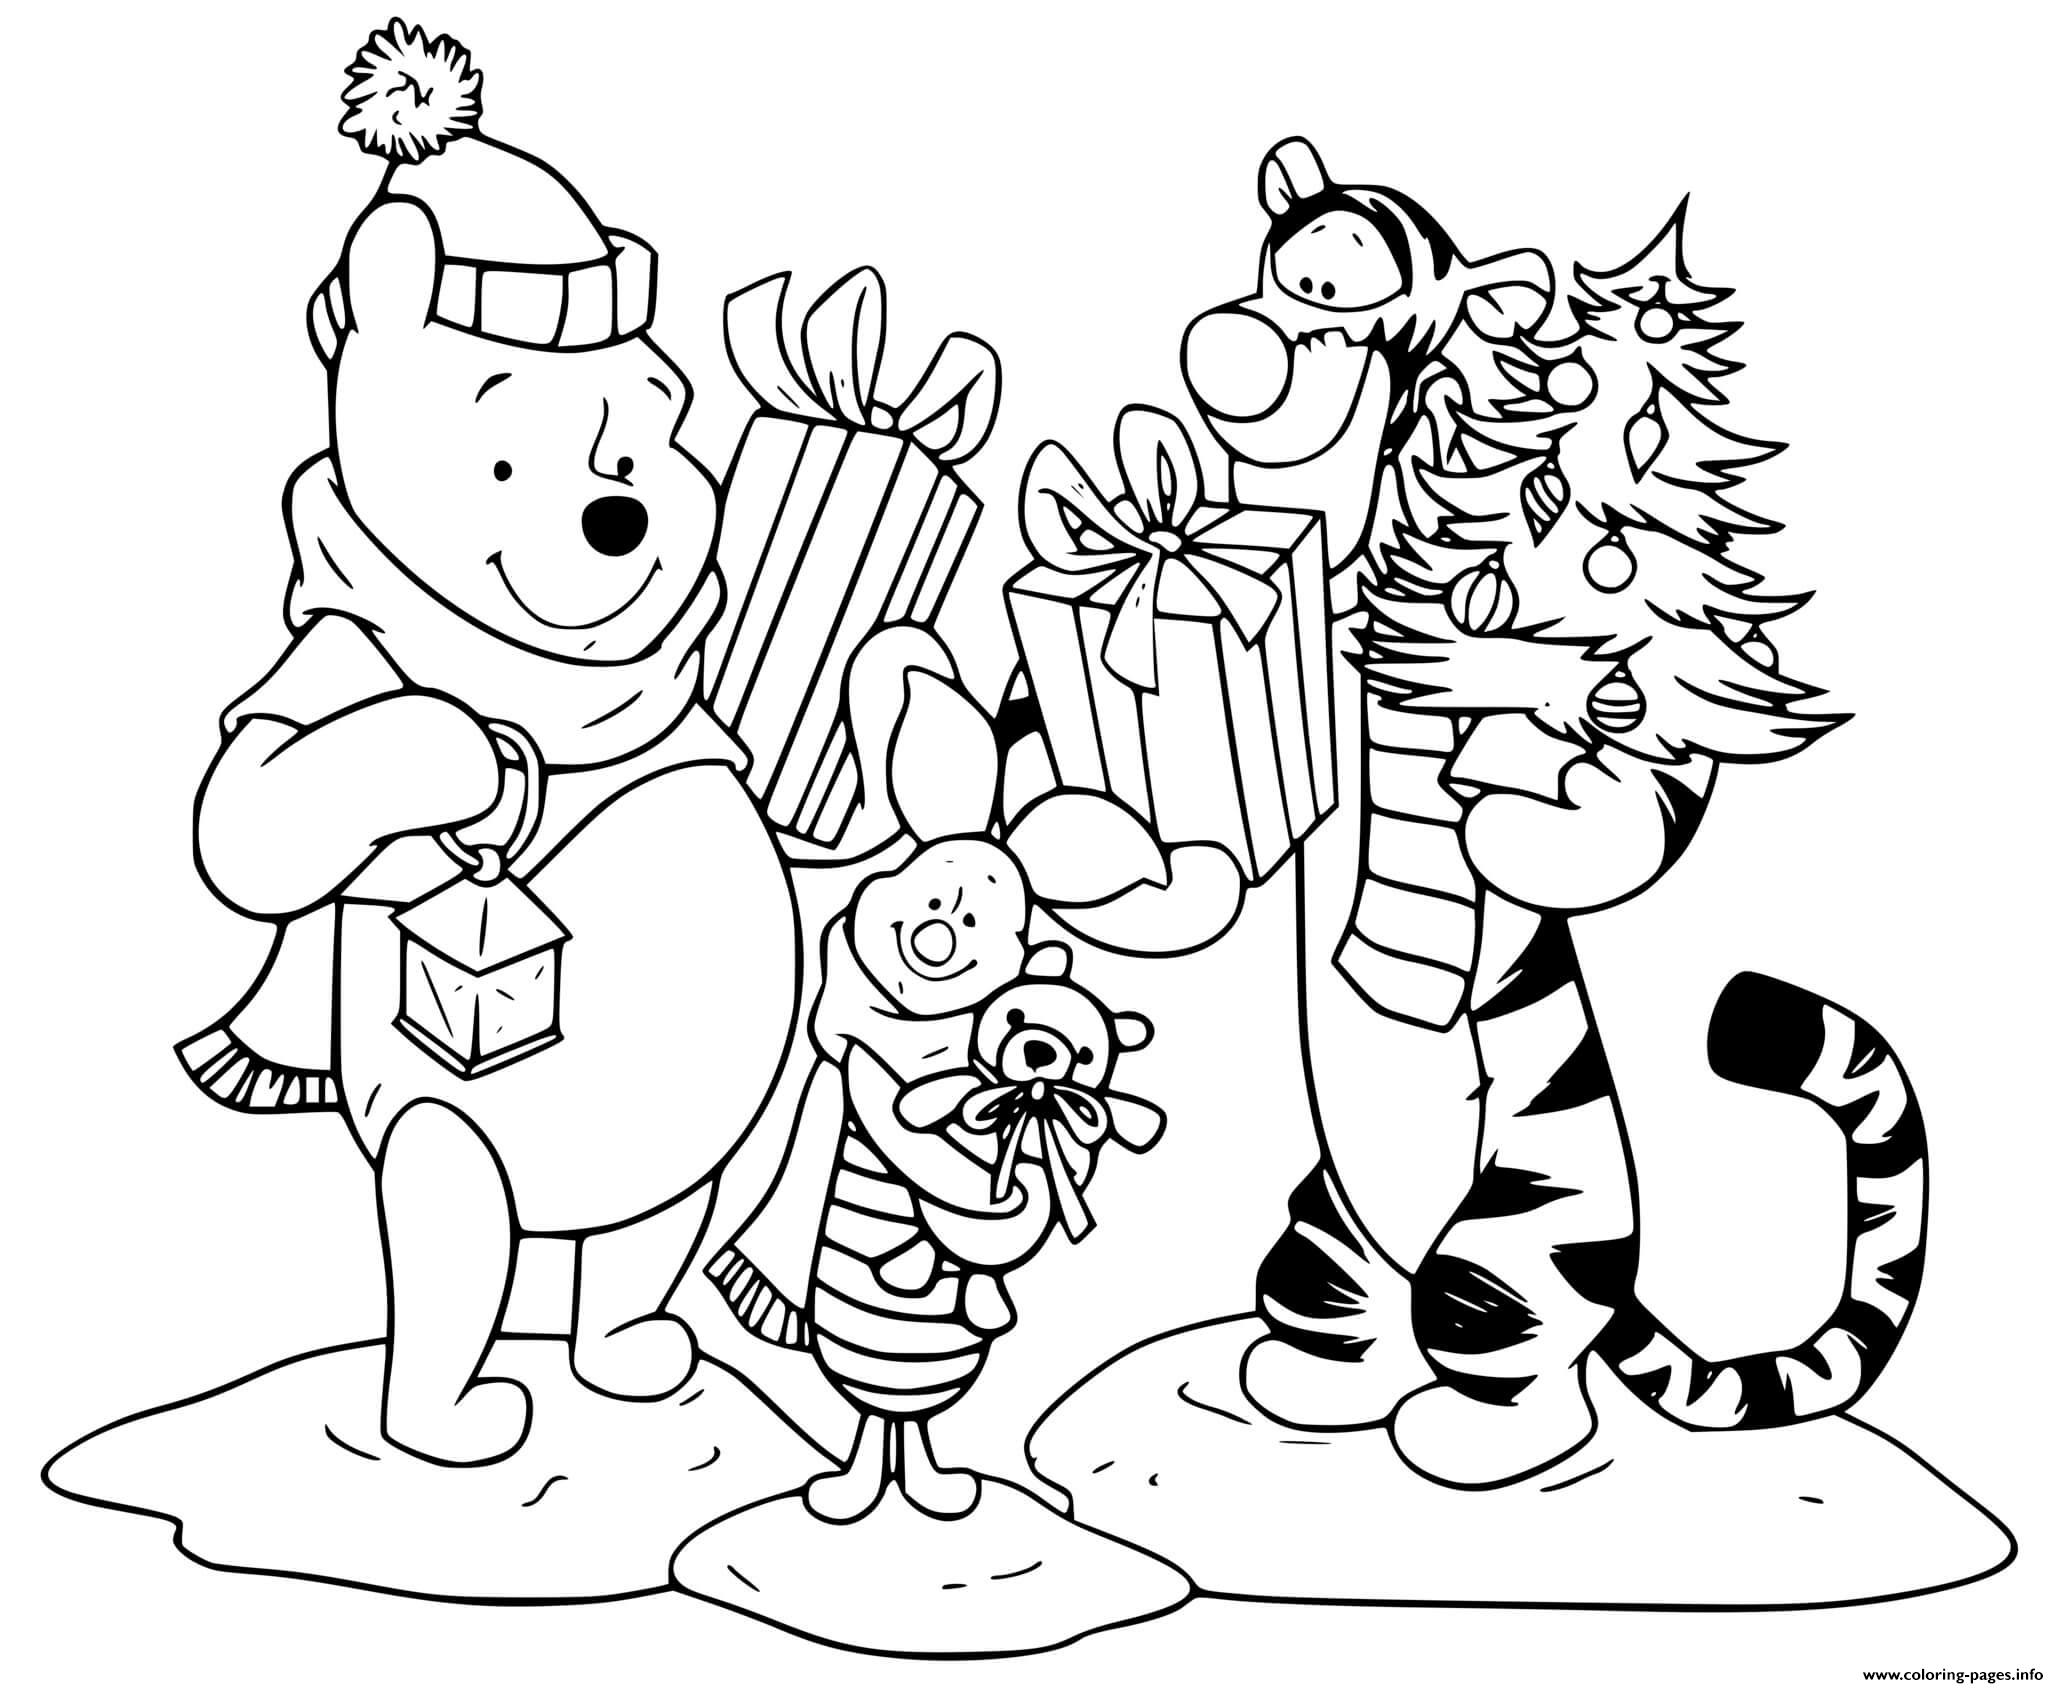 Pooh Tigger Piglet With Presents coloring